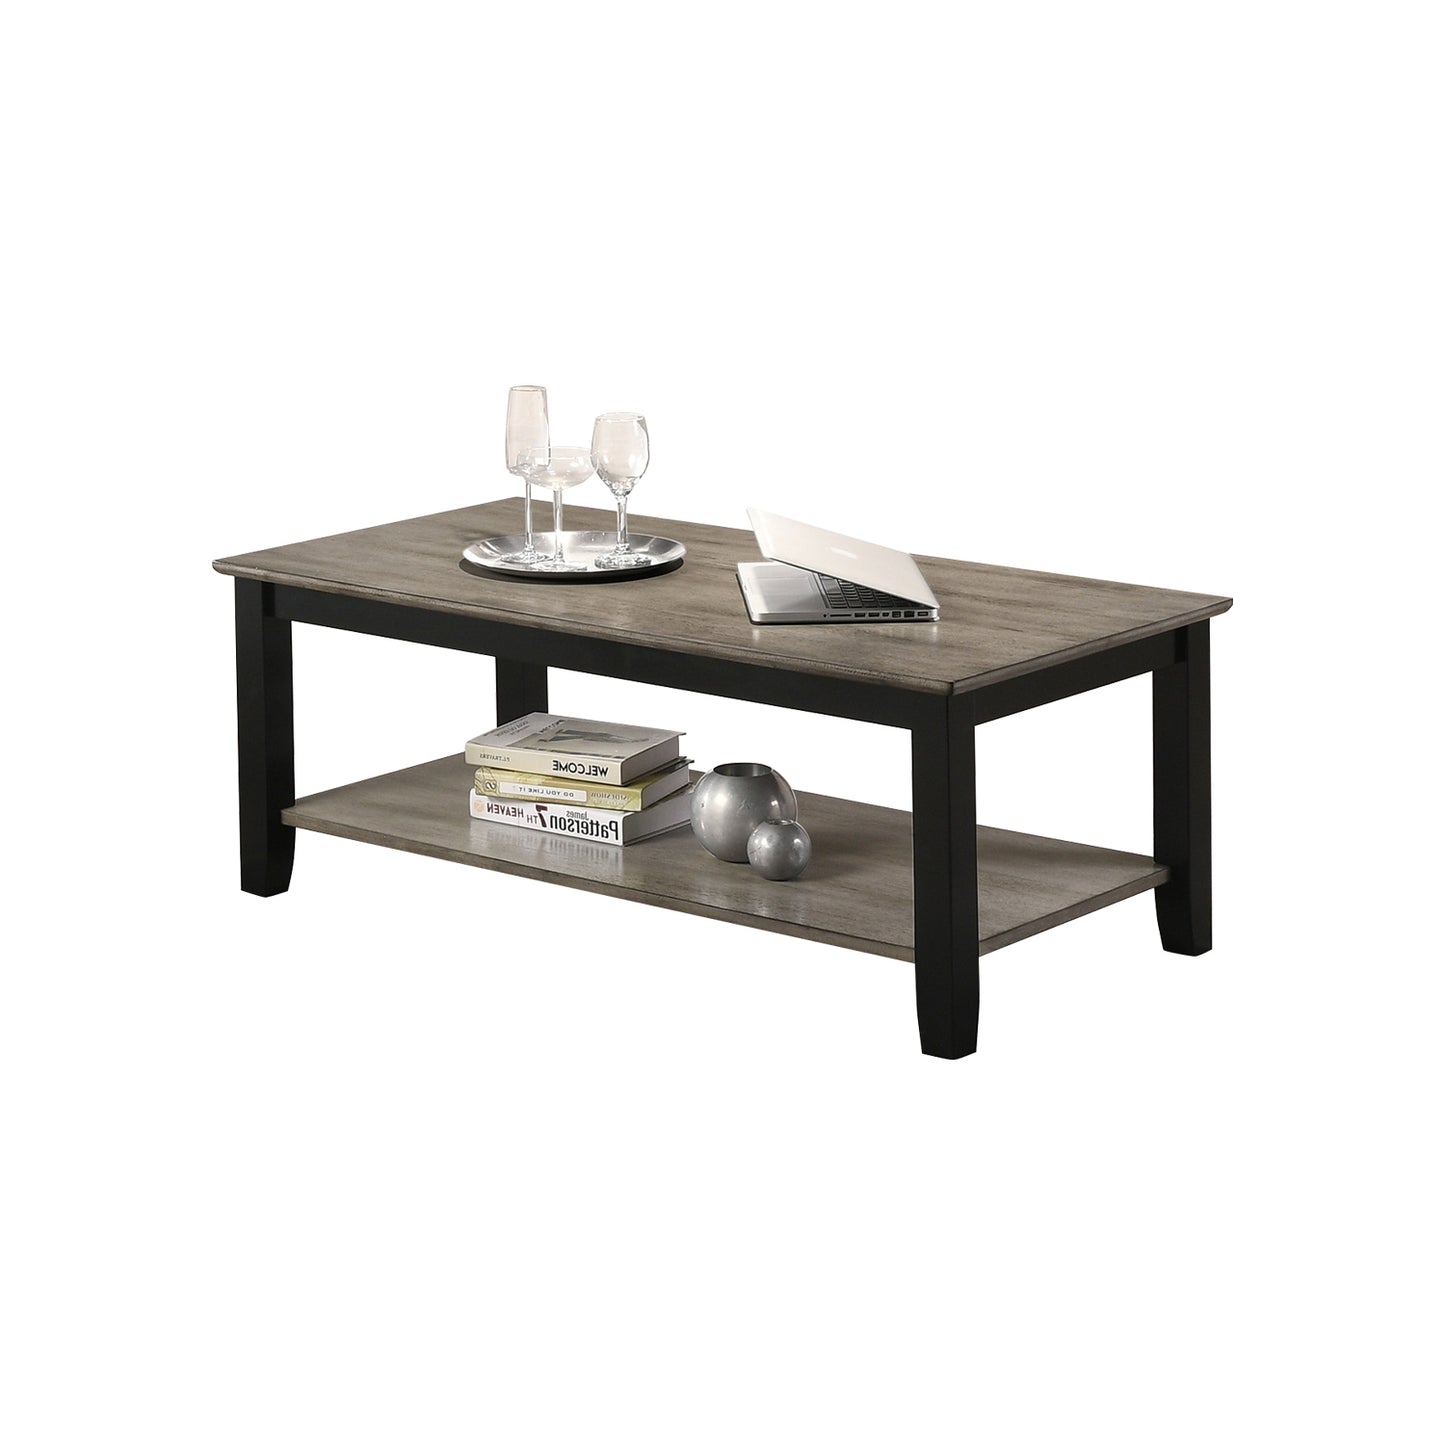 Dark Brown and Grey Coffee Table with Open Storage Shelf